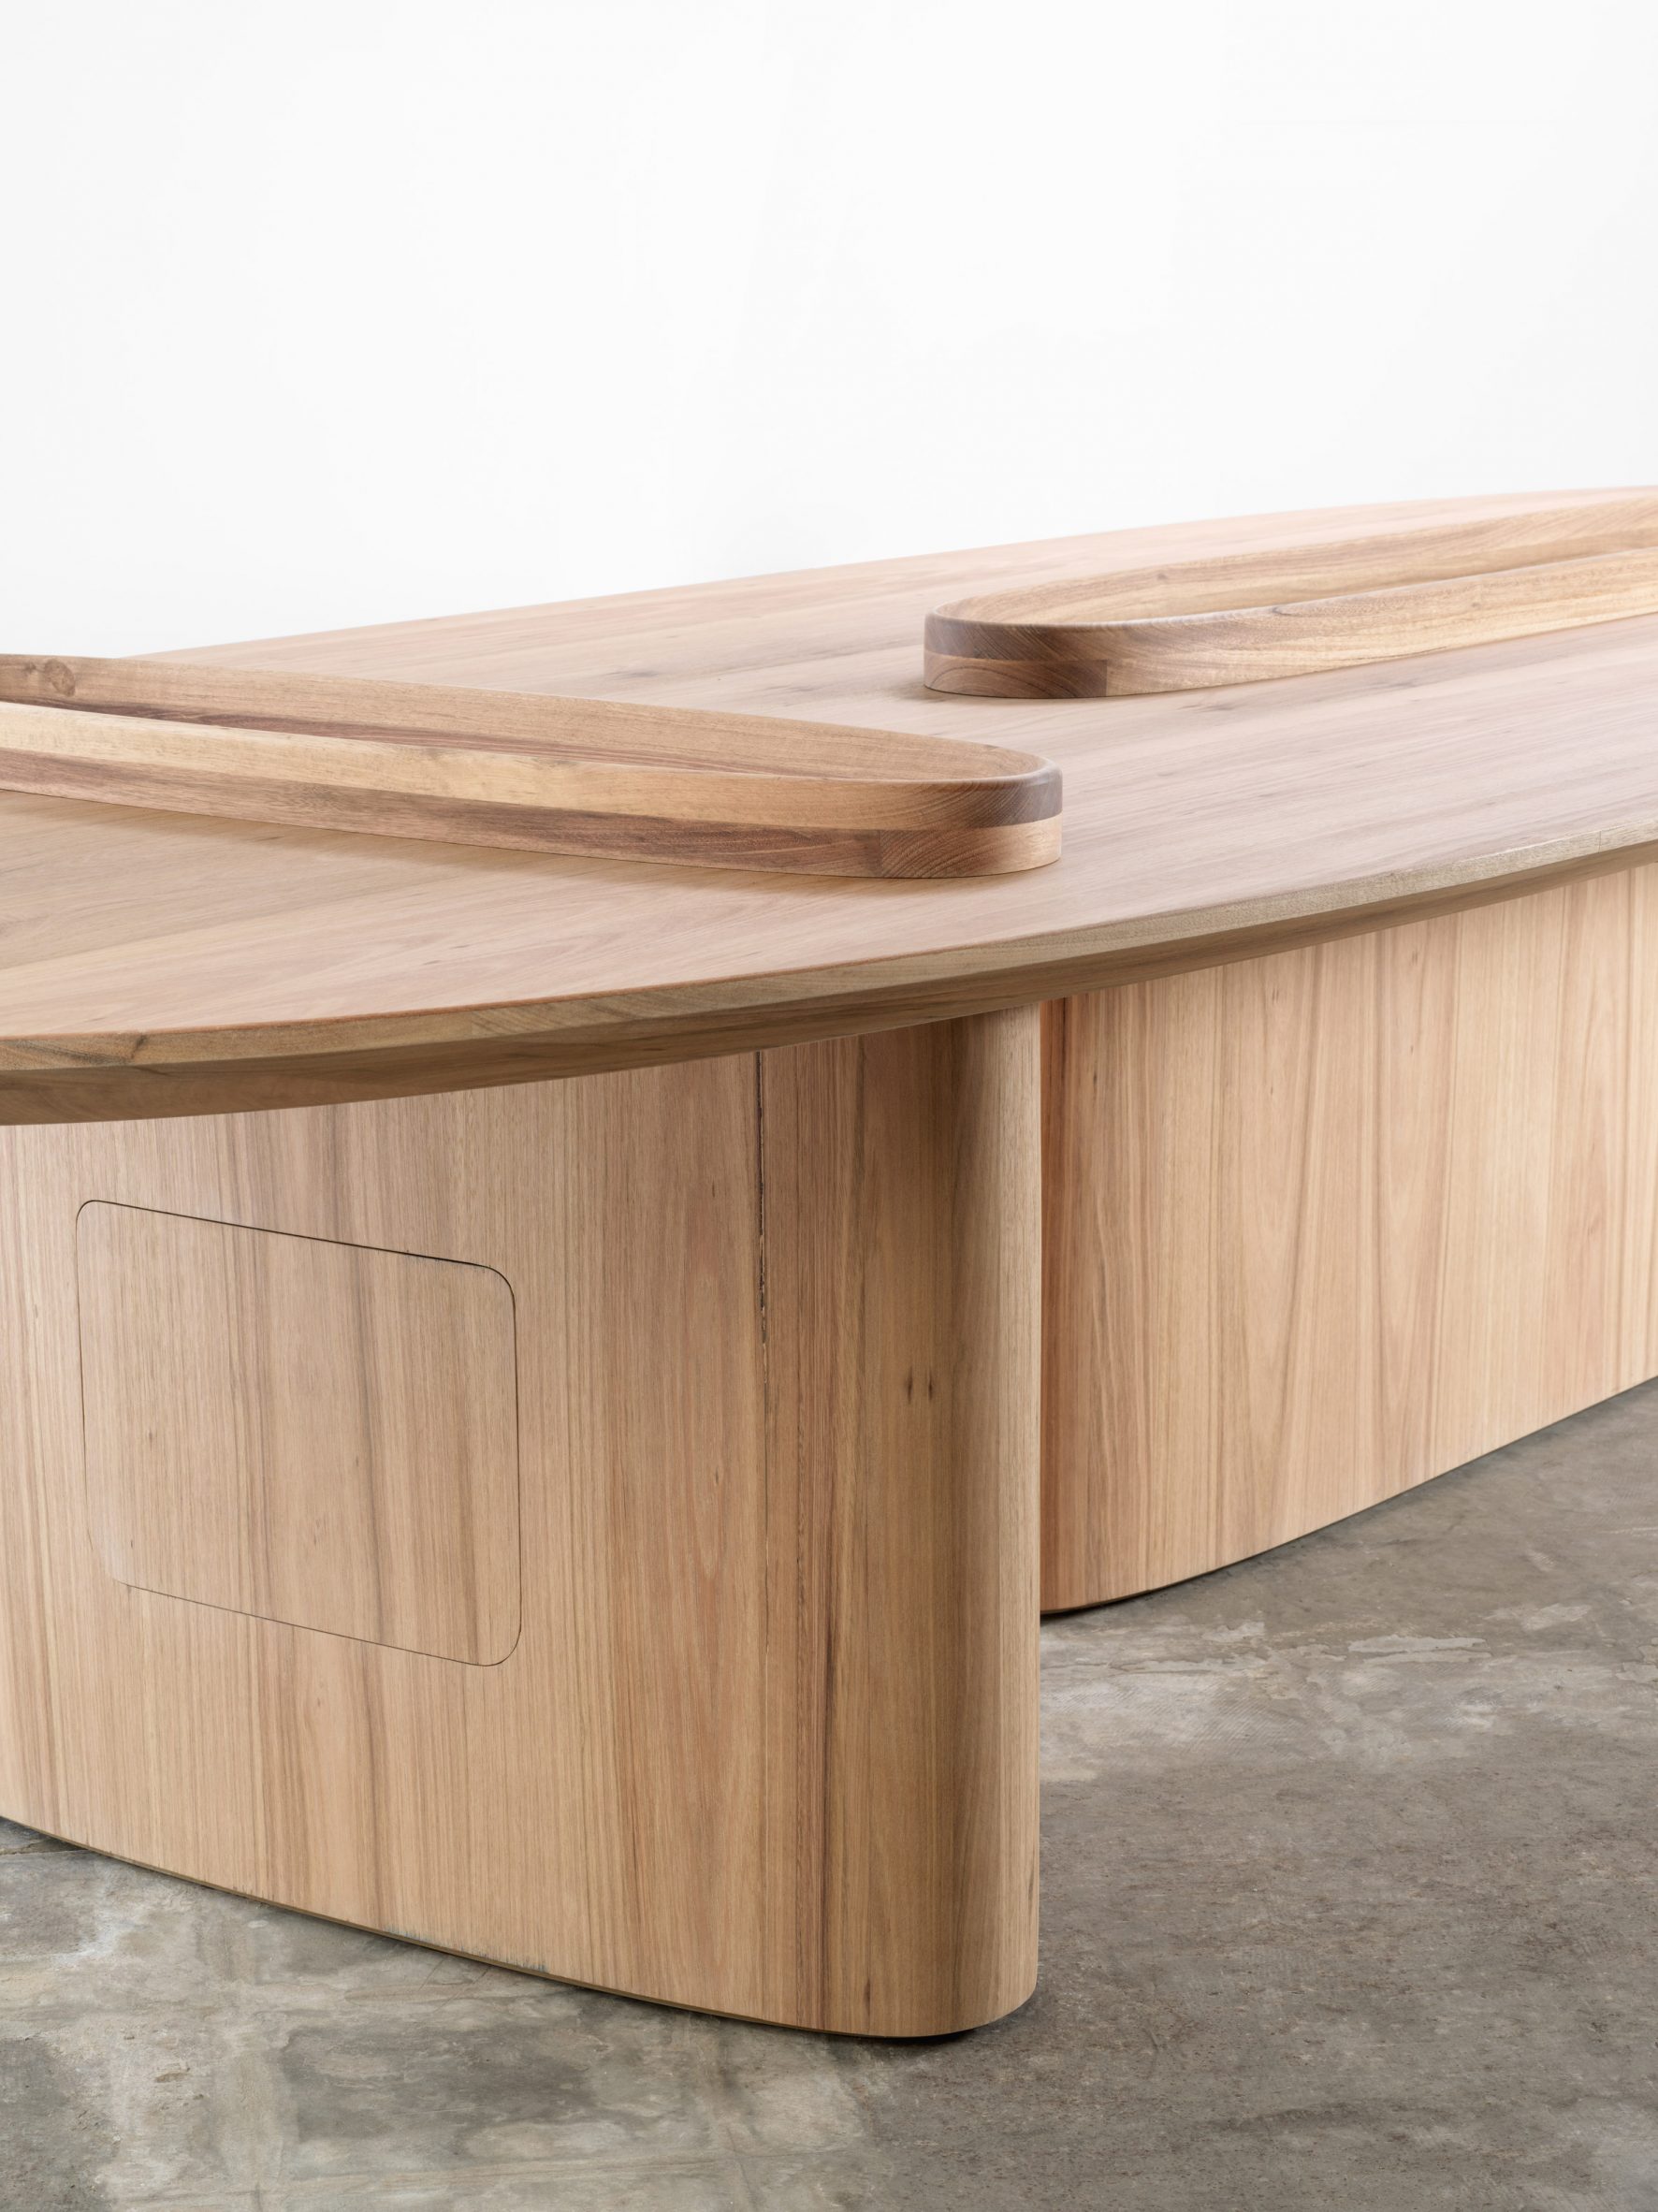 Intersection Table by Snohetta